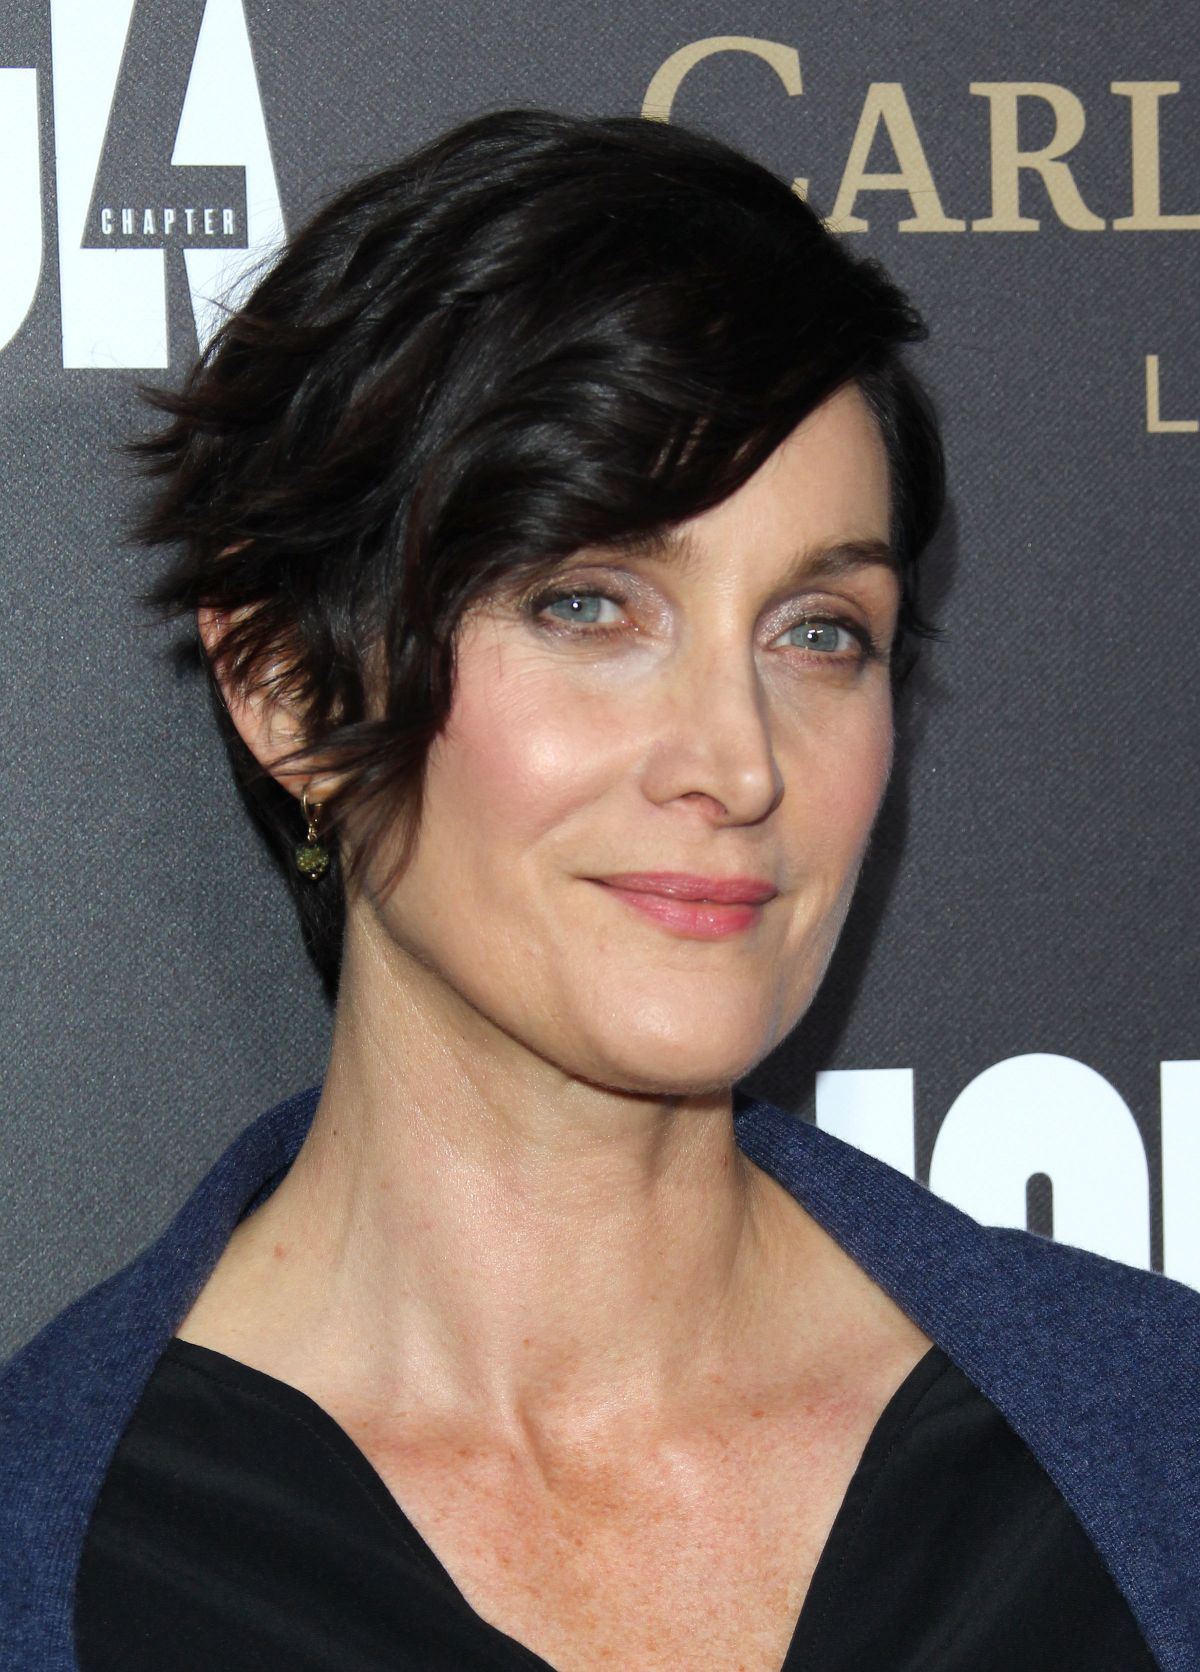 CARRIE-ANNE MOSS at 'John Wick: Chapter 2' Premiere in Los Angele...